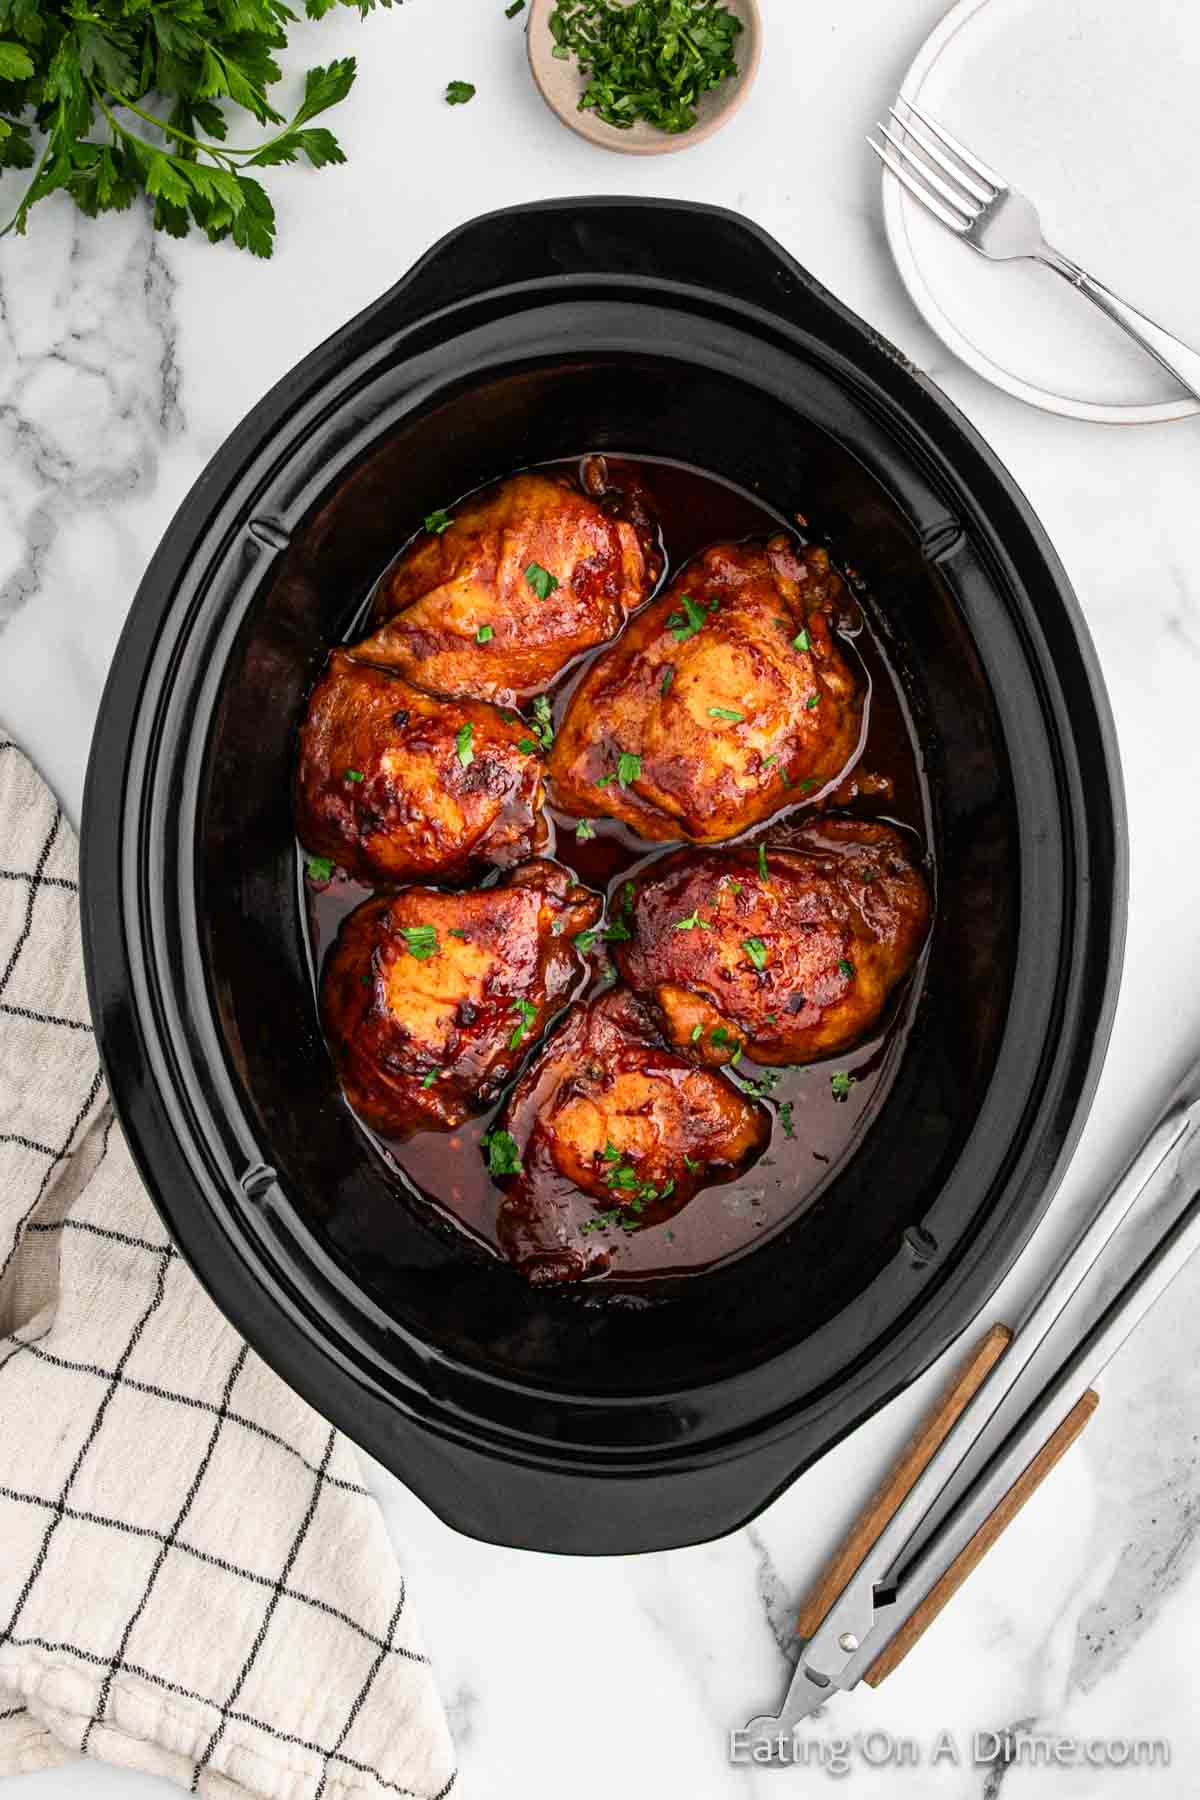 Chicken thighs in a slow cooker